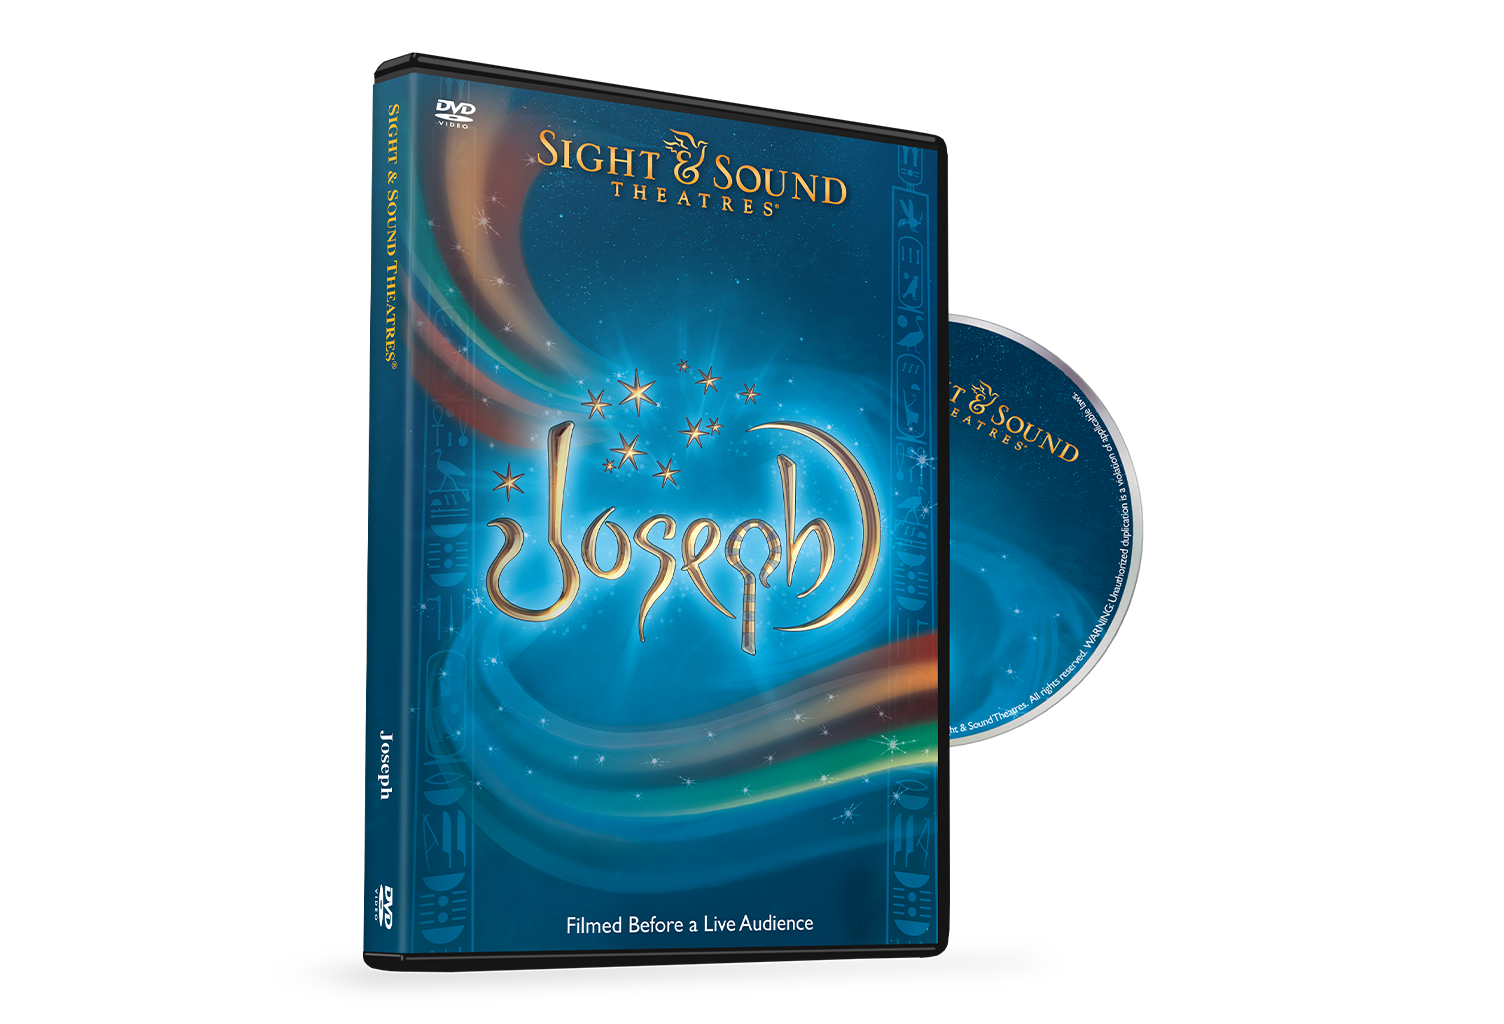 Joseph by Sight and Sounds Theatres on TBN